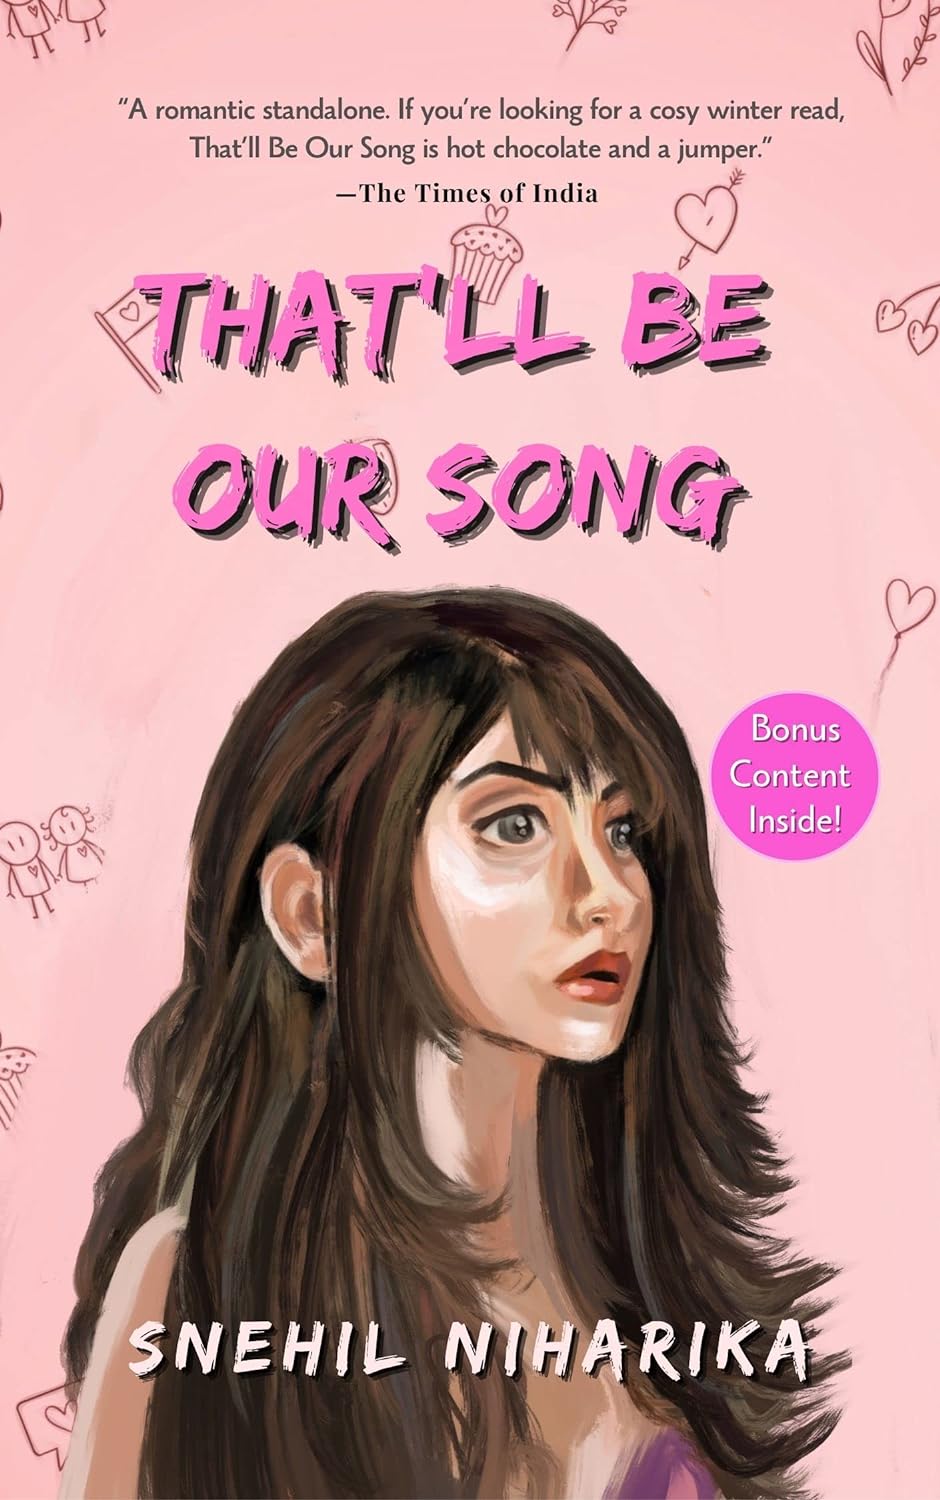 that'll be our song by Snehil Niharika